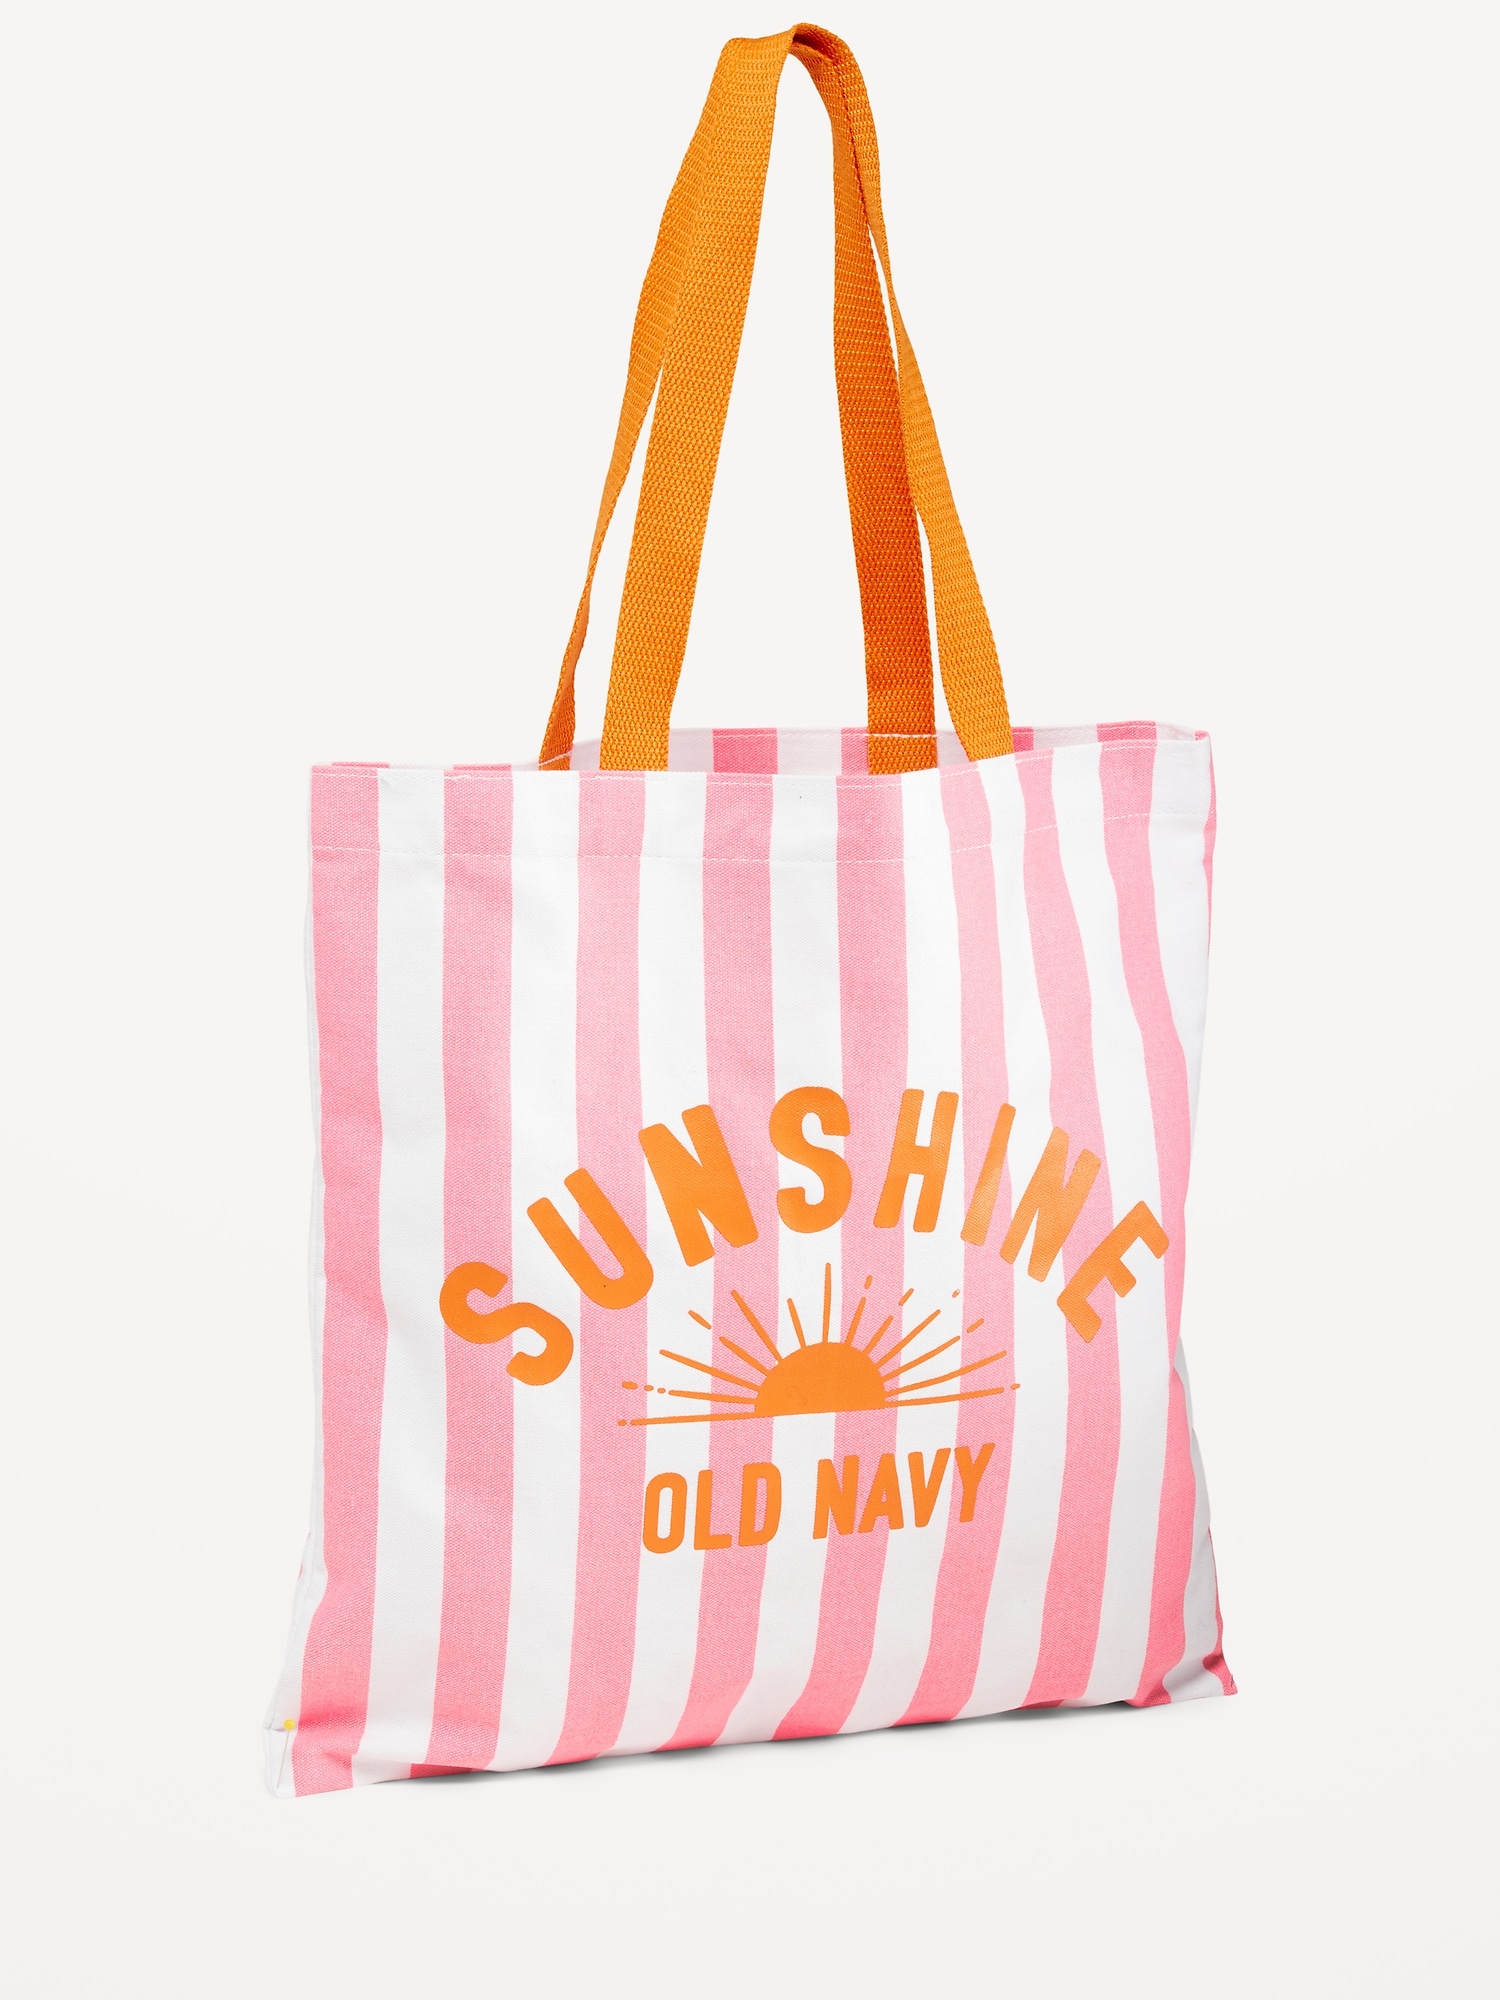 Old Navy Printed Canvas Tote Bag for Women pink - 818763142